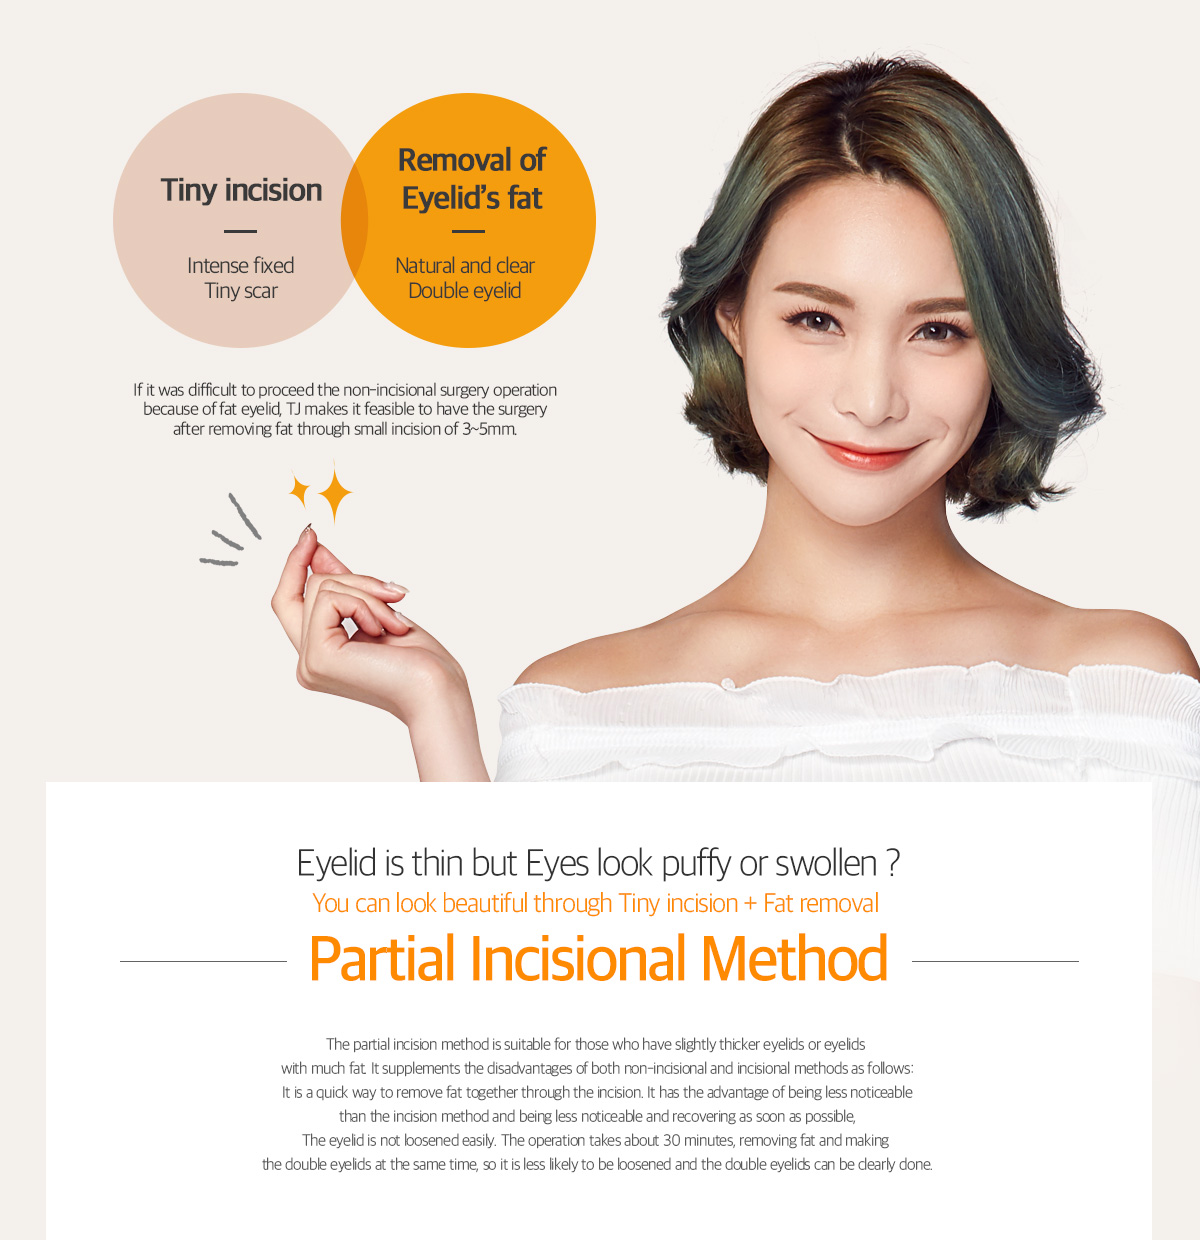 If it was difficult to proceed the non-incisional surgery operation because of fat eyelid, TJ plastic surgery makes it feasible to have the surgery after removing fat through small incision of 3~5mm.